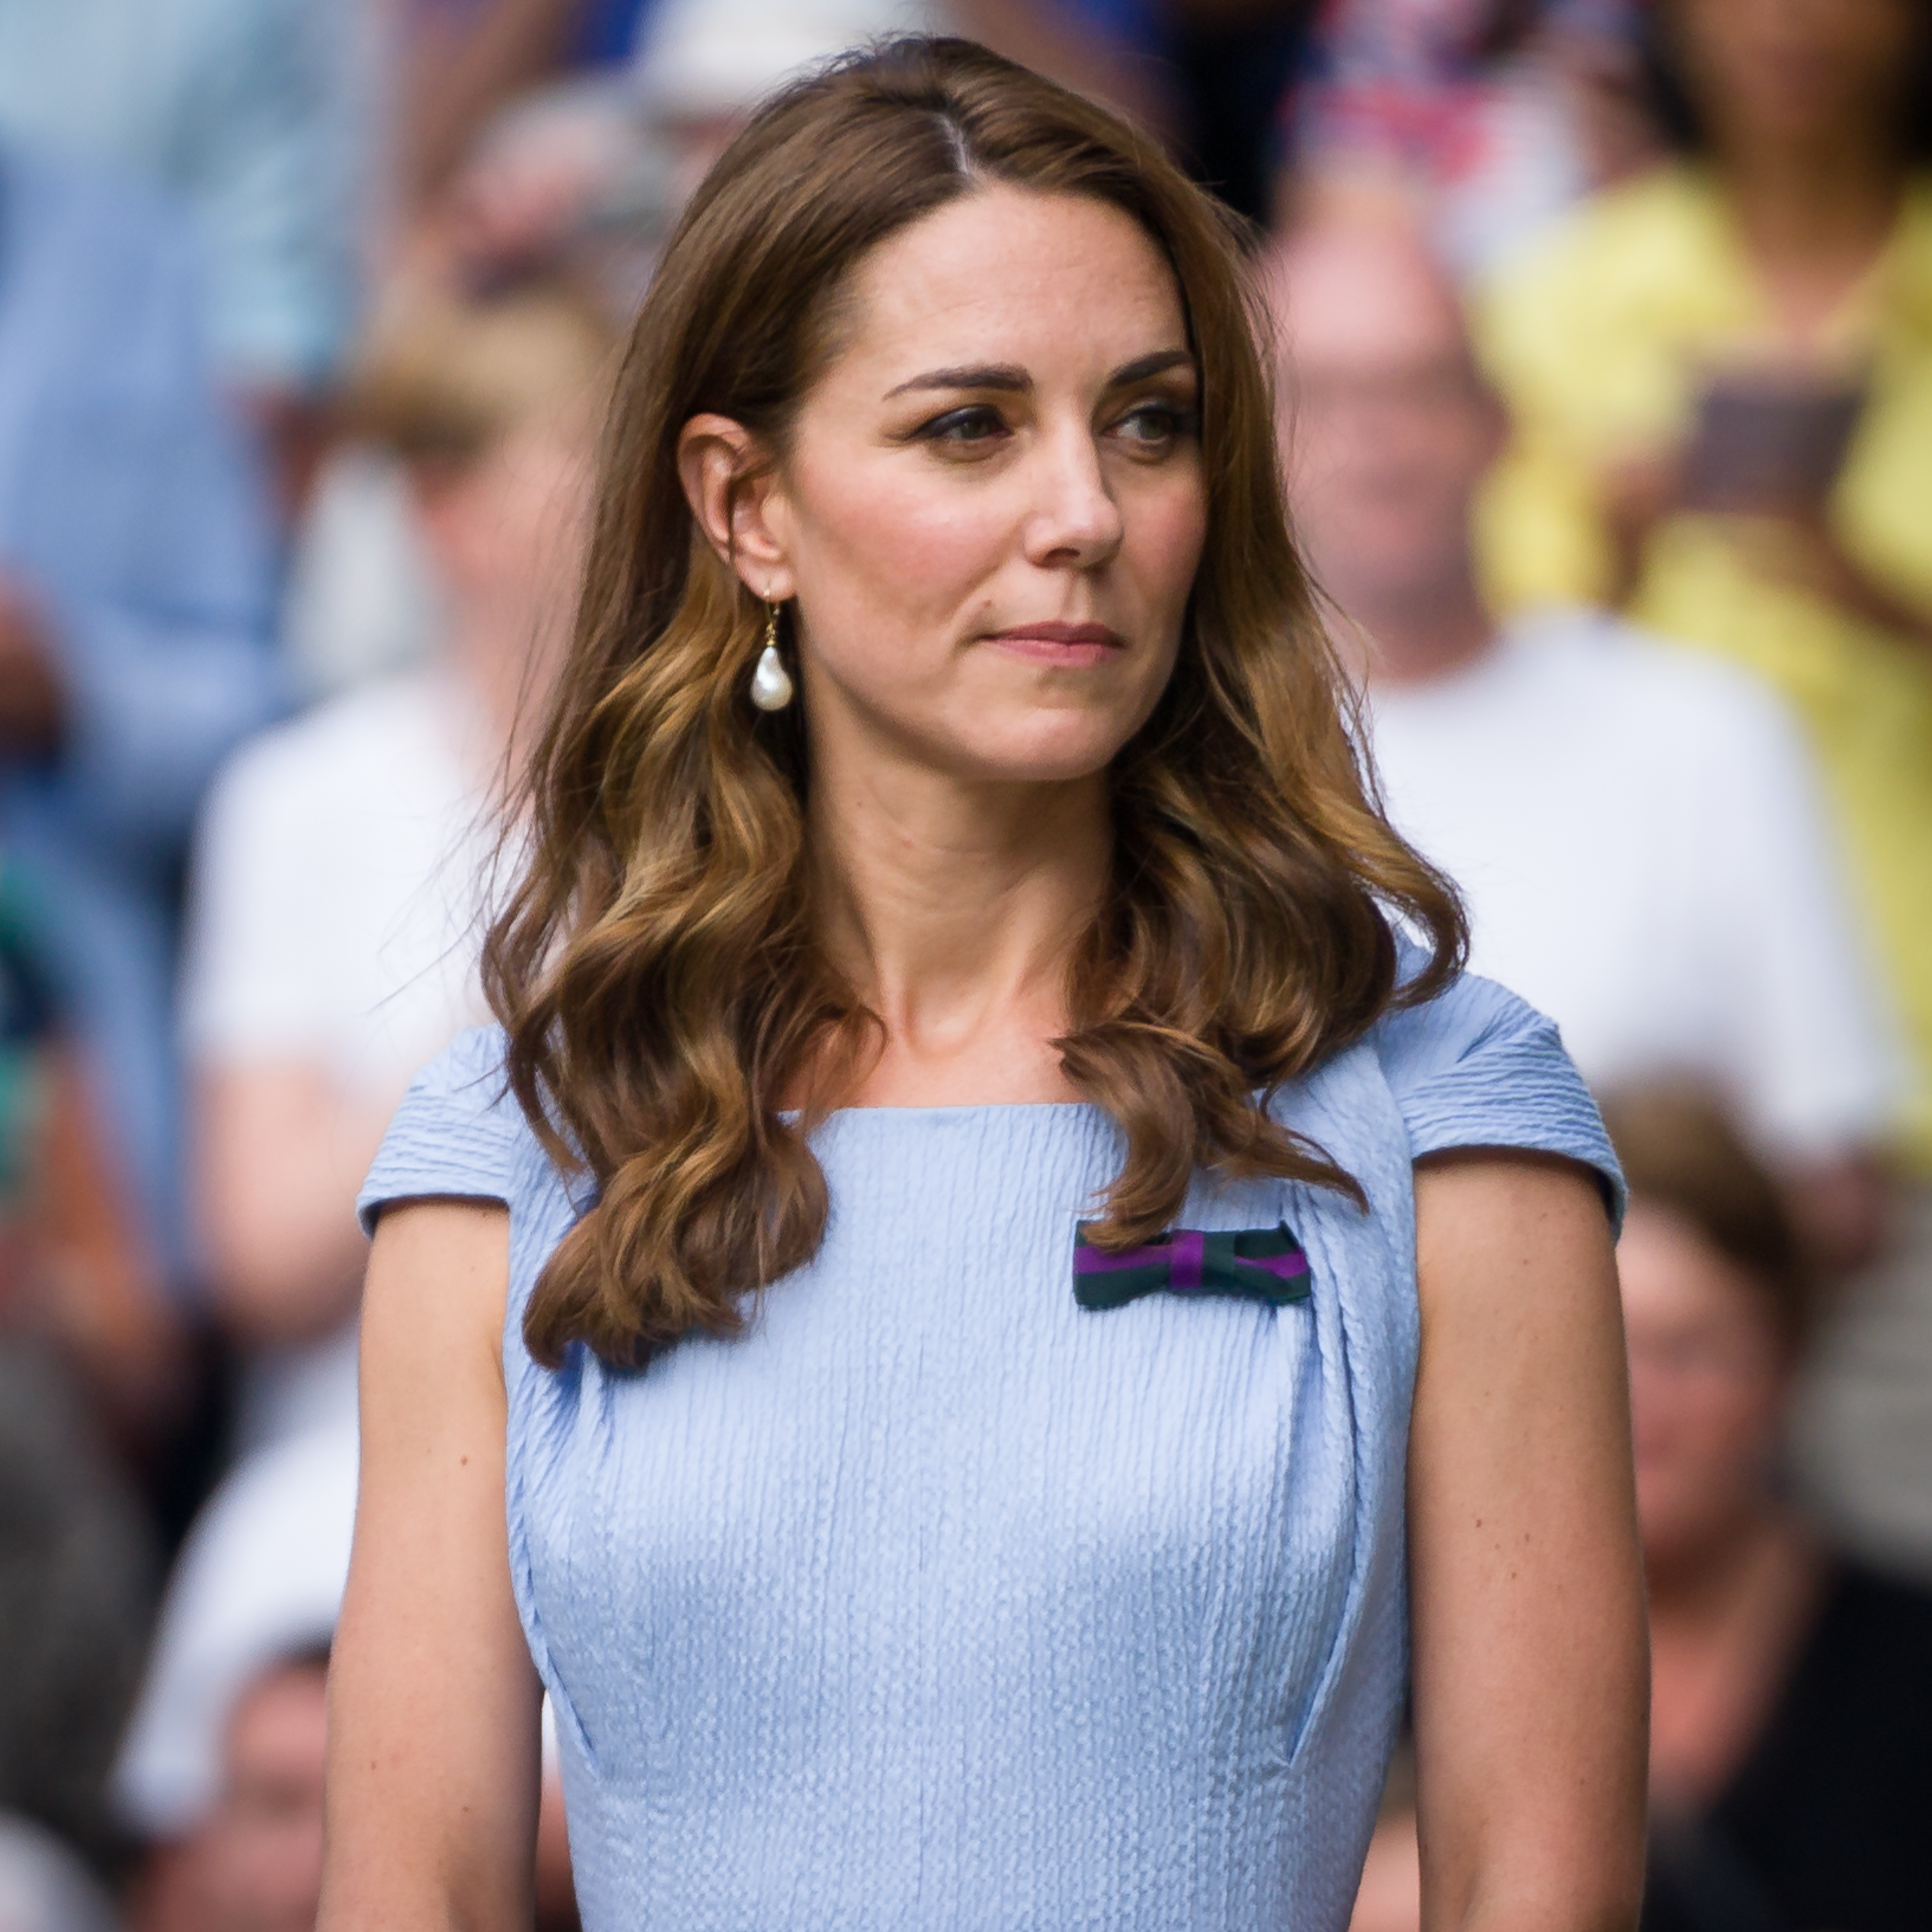 Catherine, Princess of Wales on July 14, 2019, in London, England | Source: Getty Images